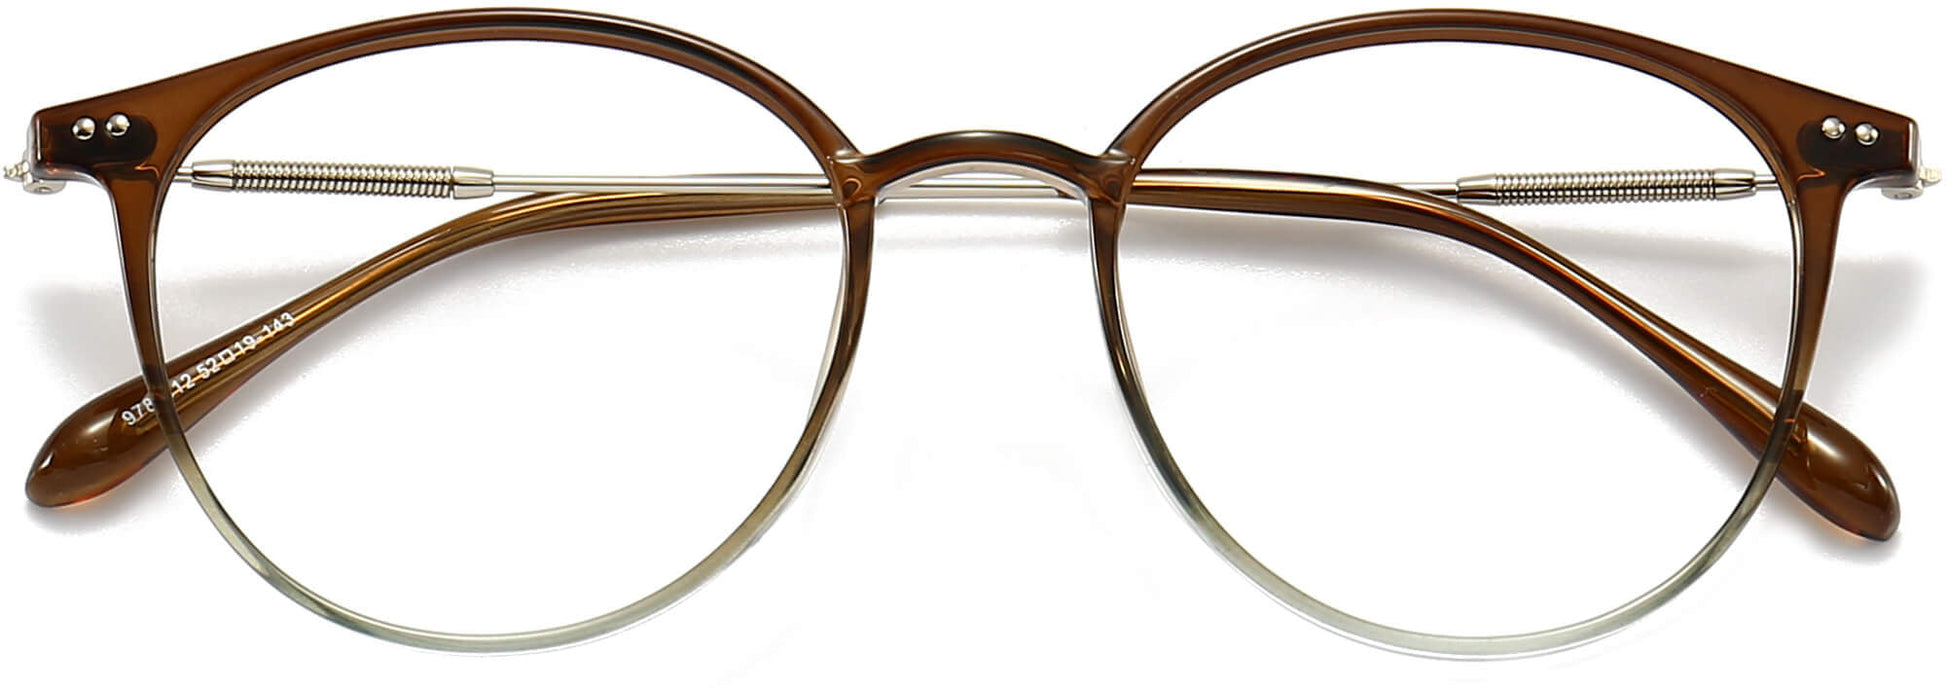 Rhea Round Brown Eyeglasses from ANRRI, closed view